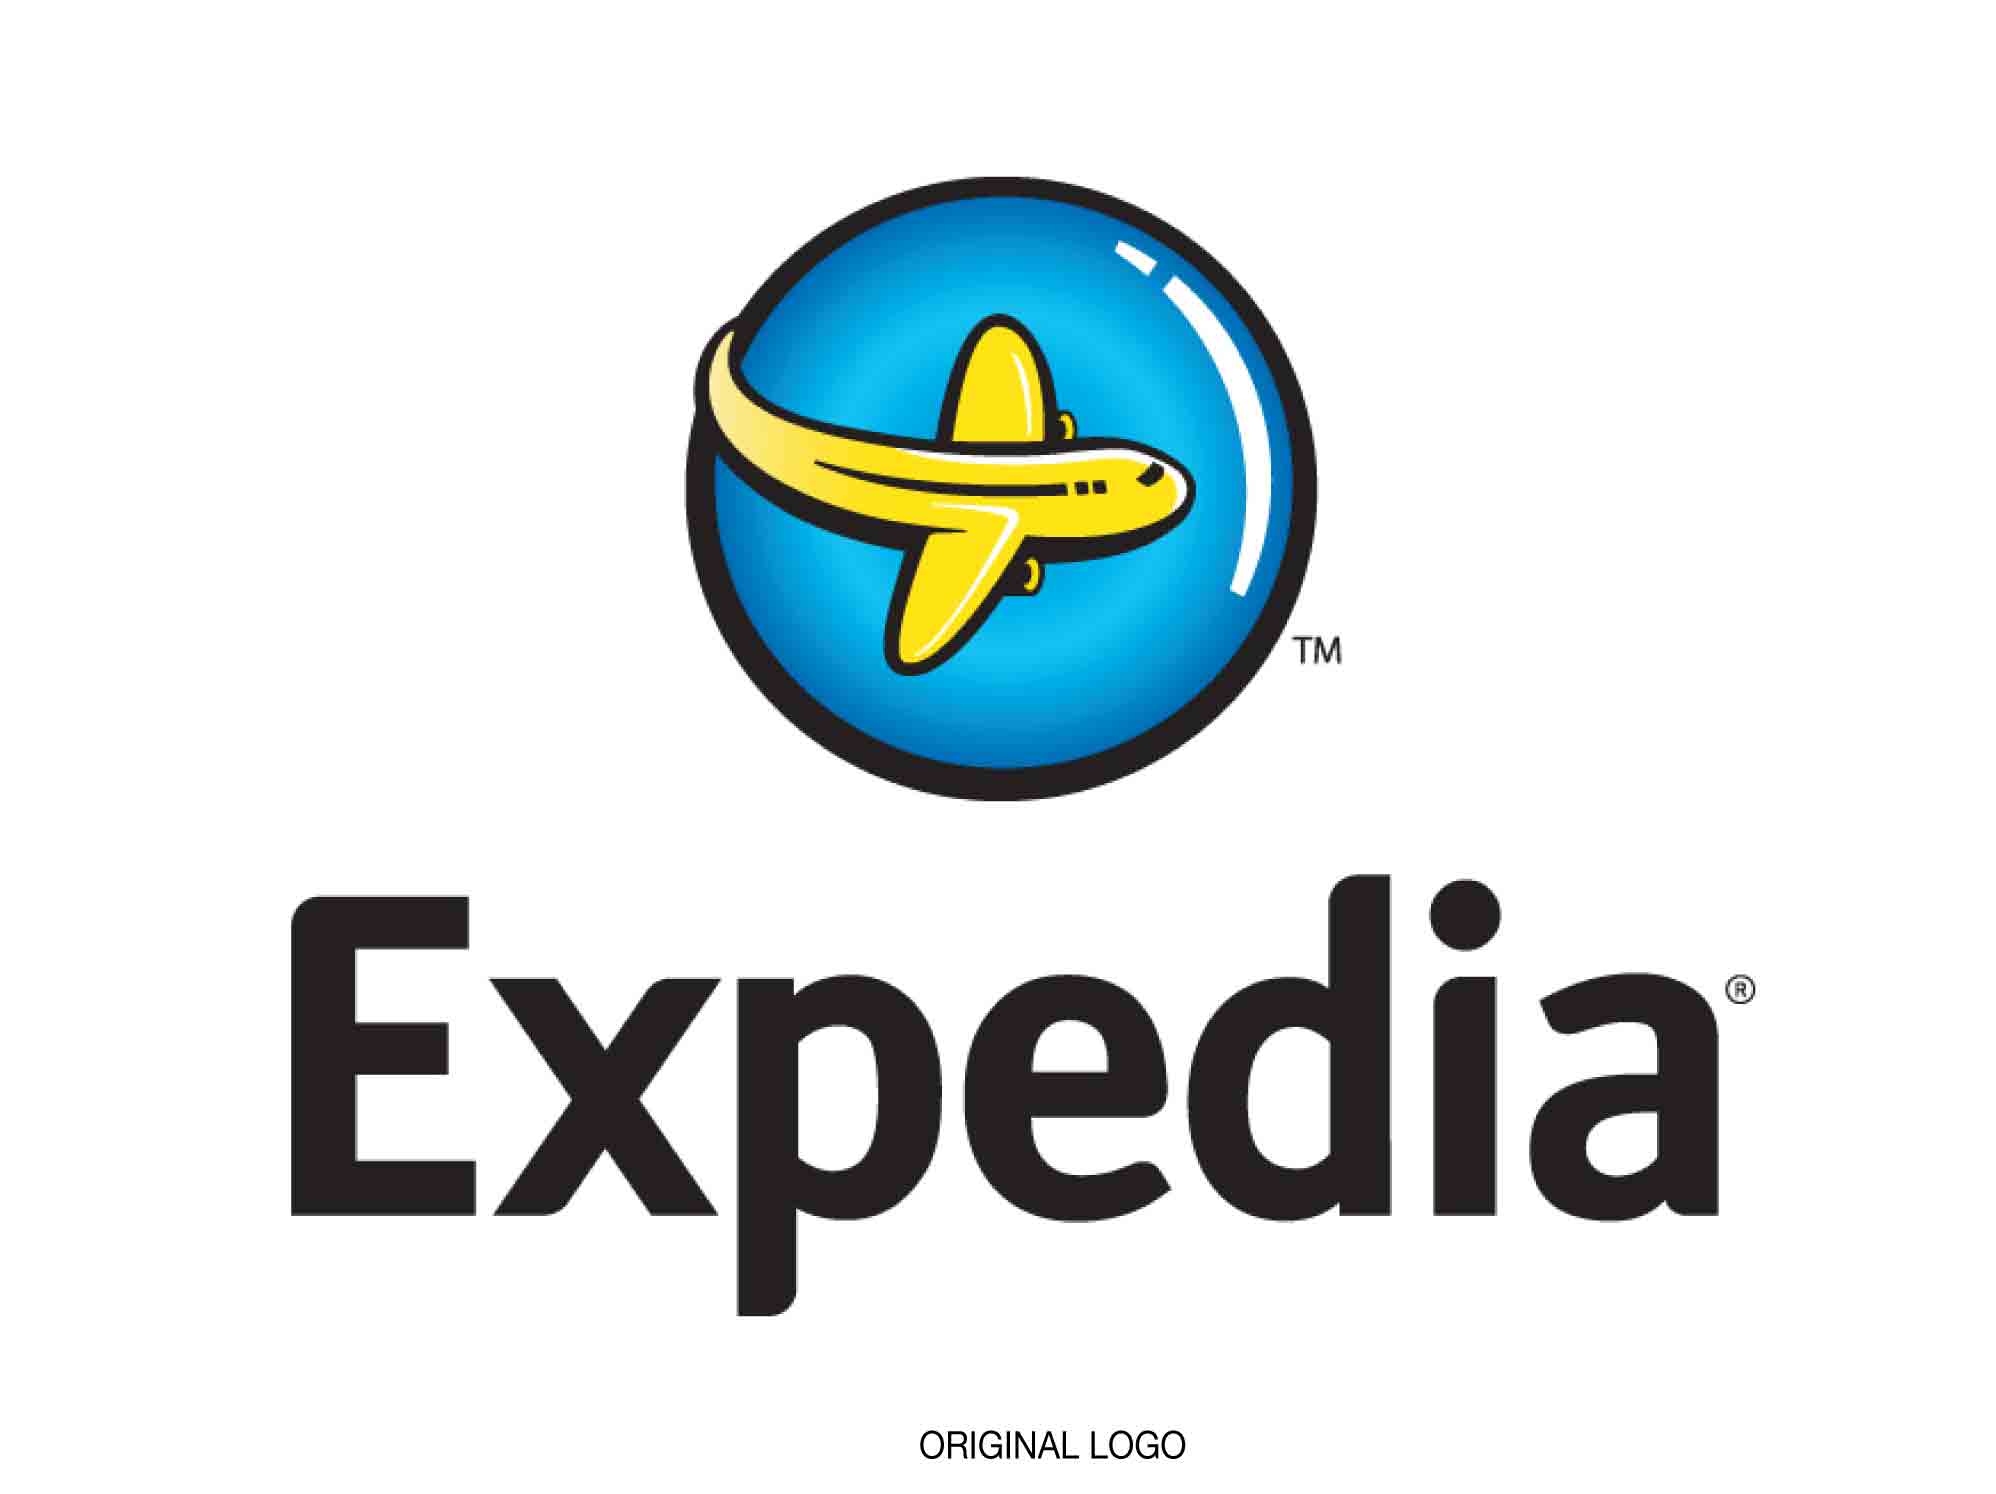 Expedia New Logo - Expedia Repositions | Articles | LogoLounge